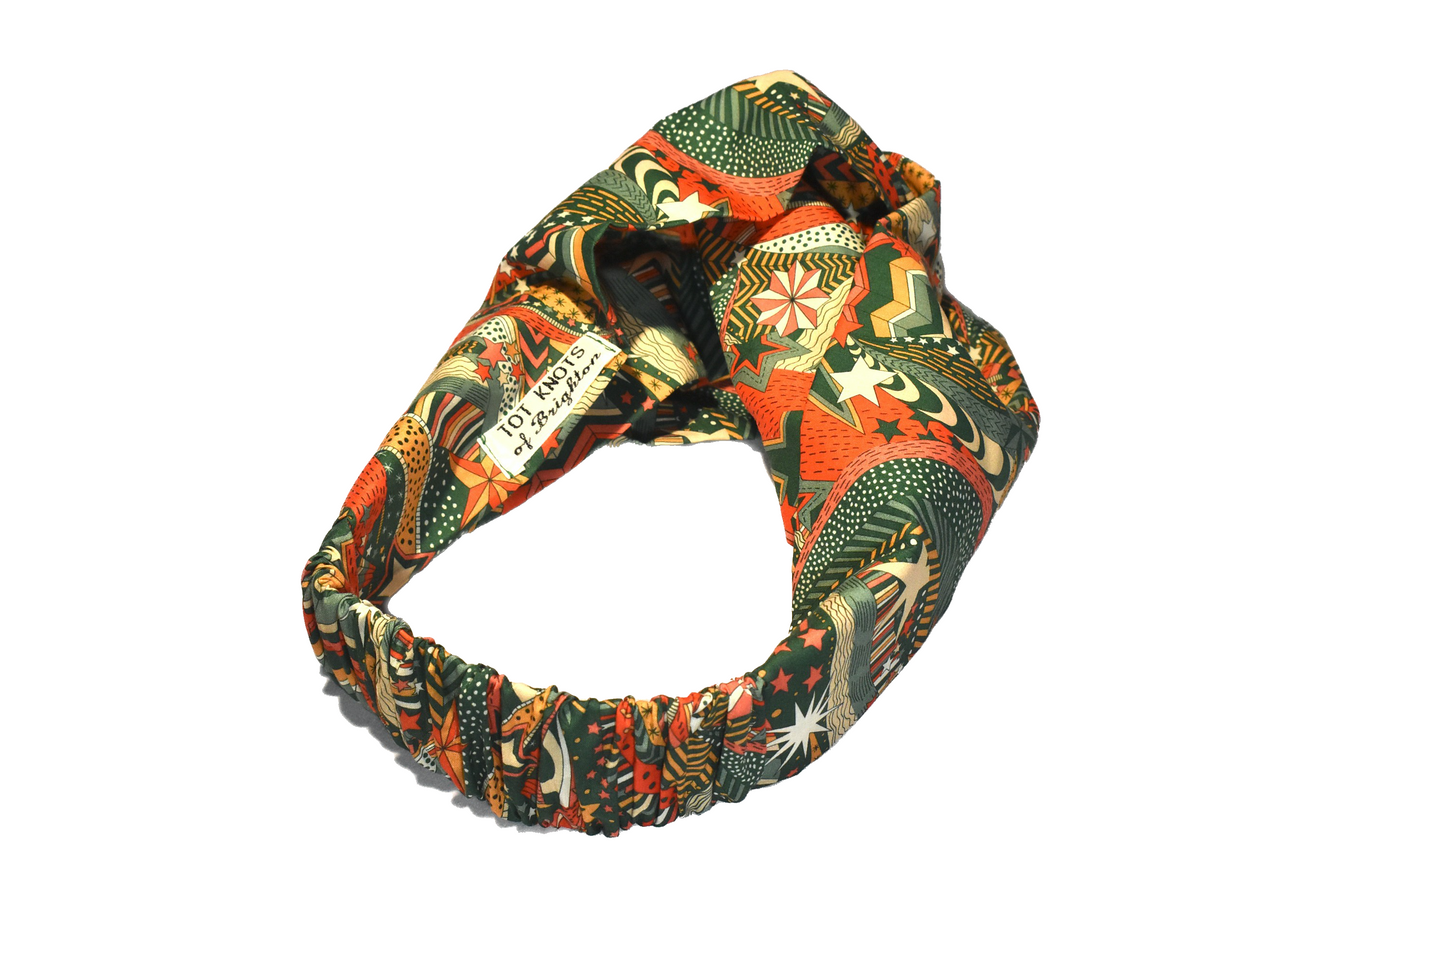 Ladies Twisted Turban hairband and neck scarf in My Little Star Liberty of London Christmas print